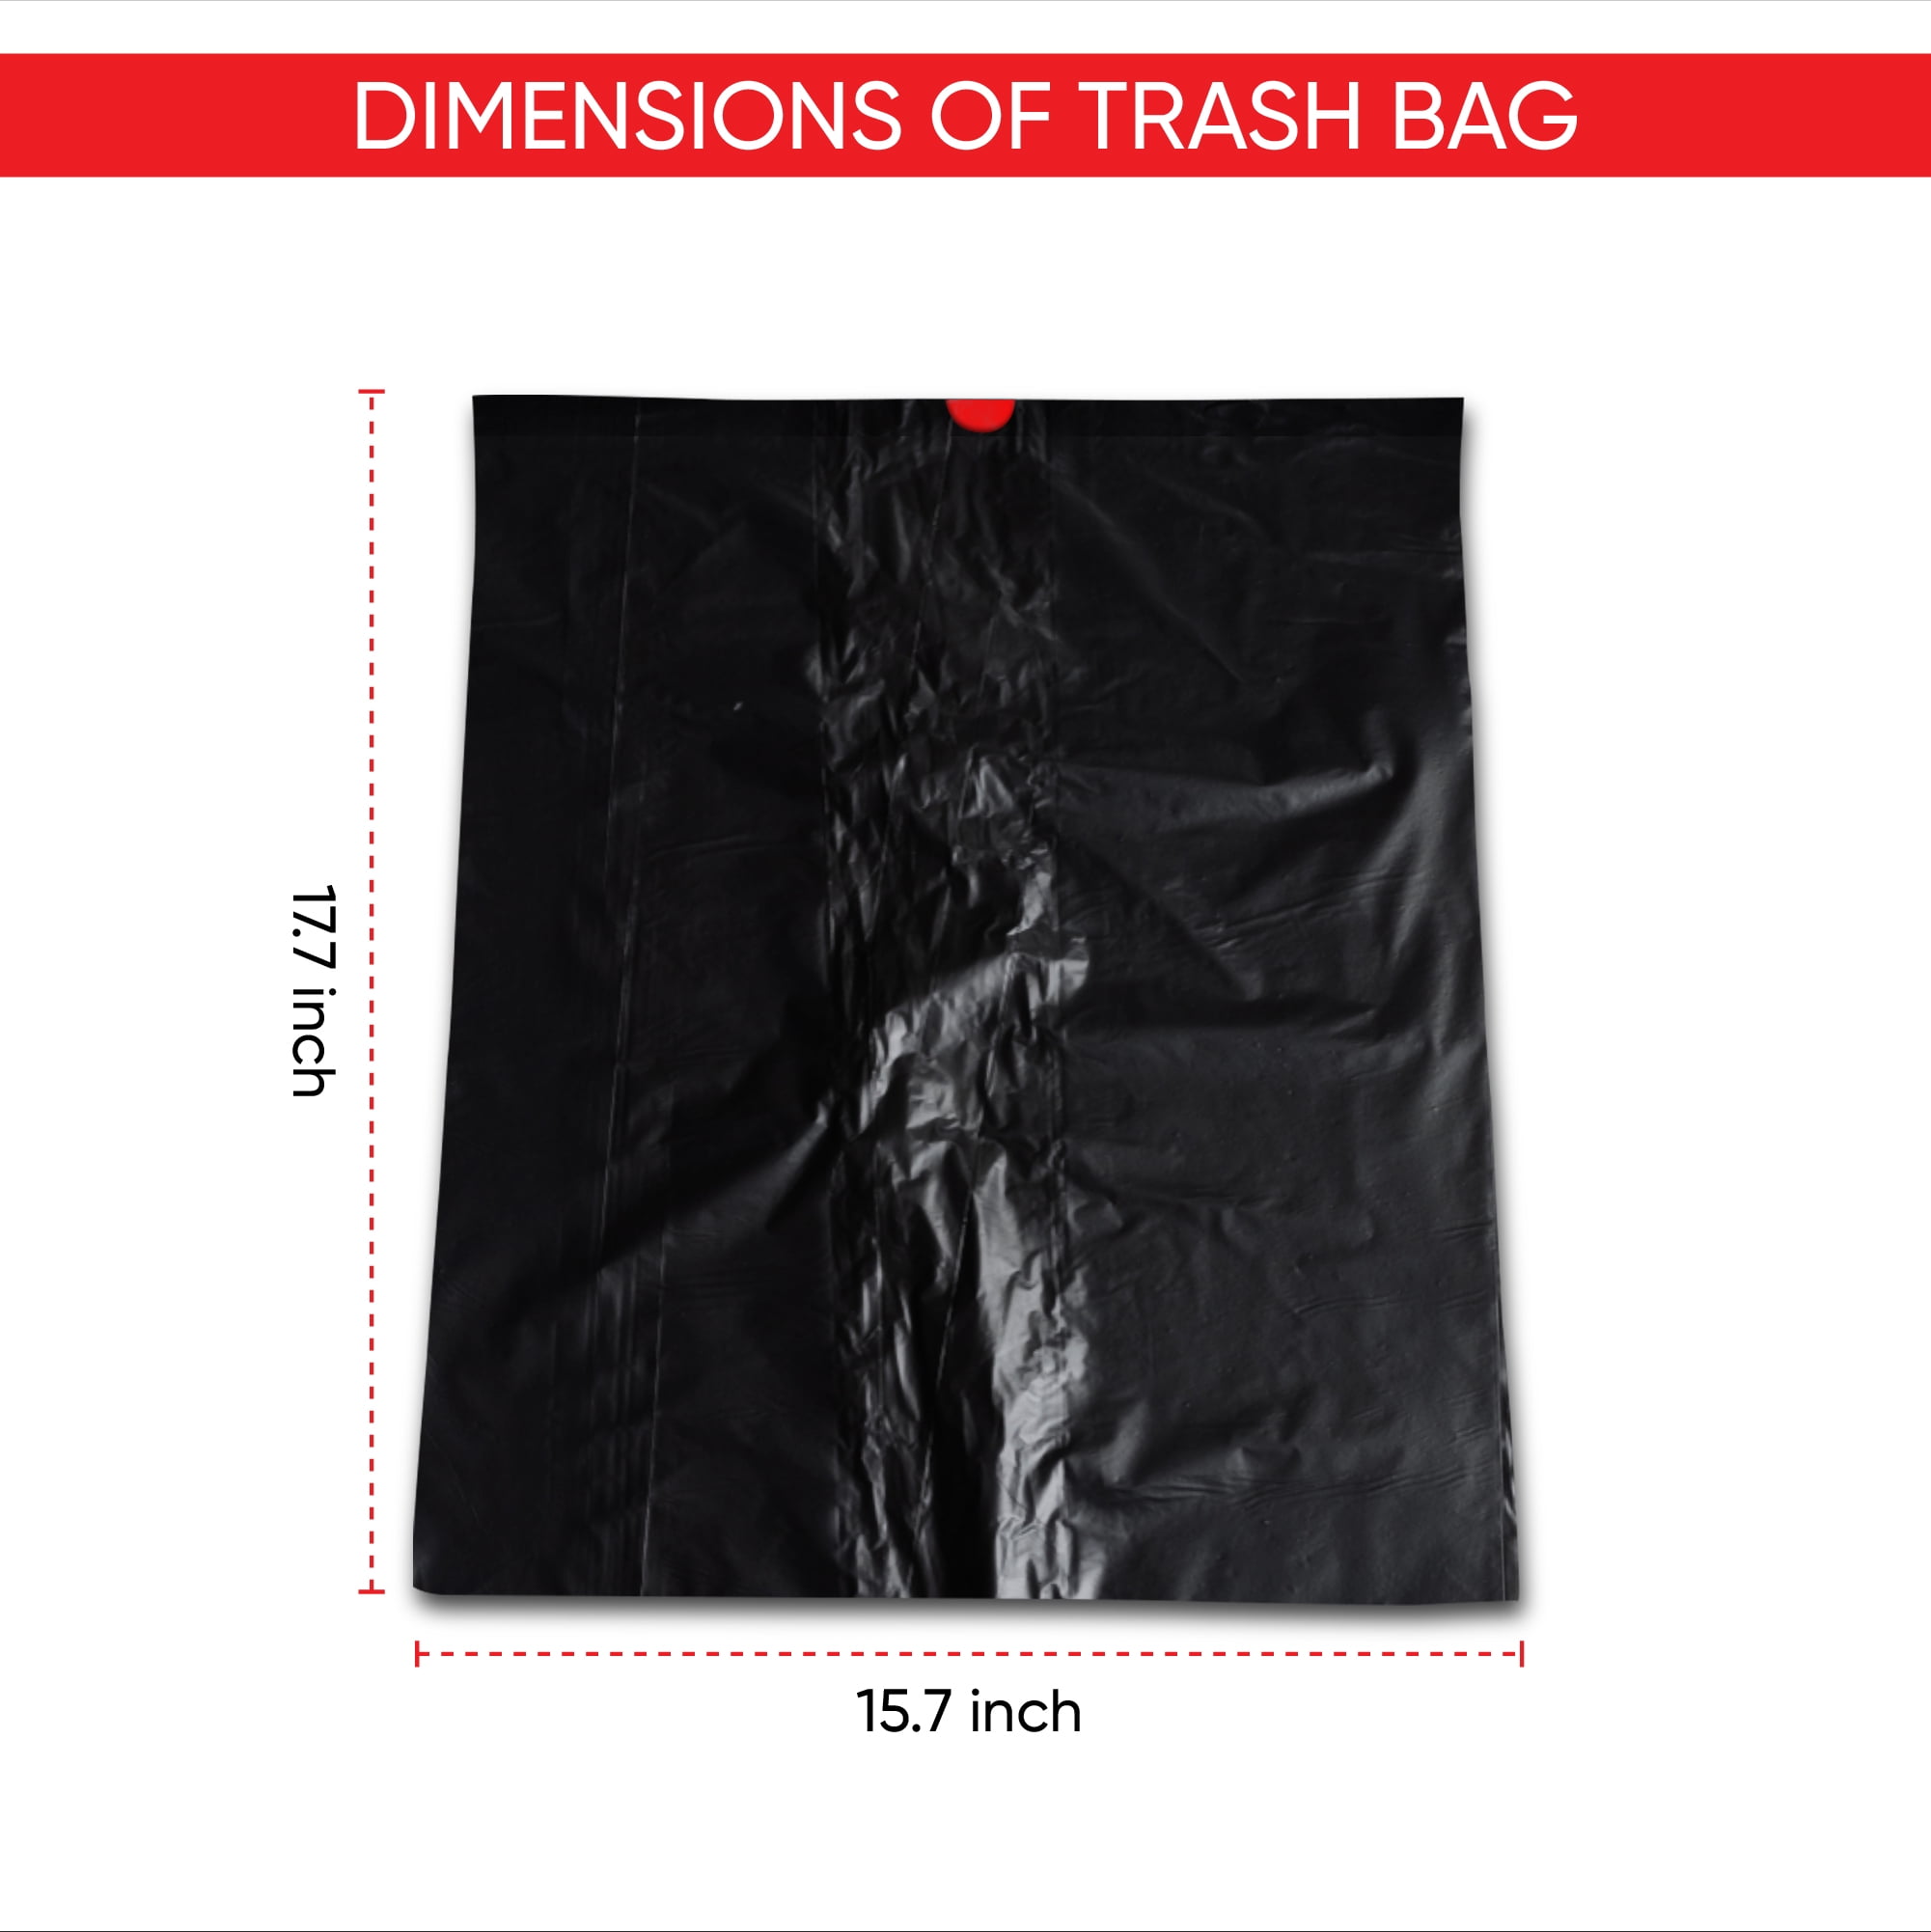 Car Trash Bag Roll with Drawstring 4-5 Liters (20 Count) – Haussimple